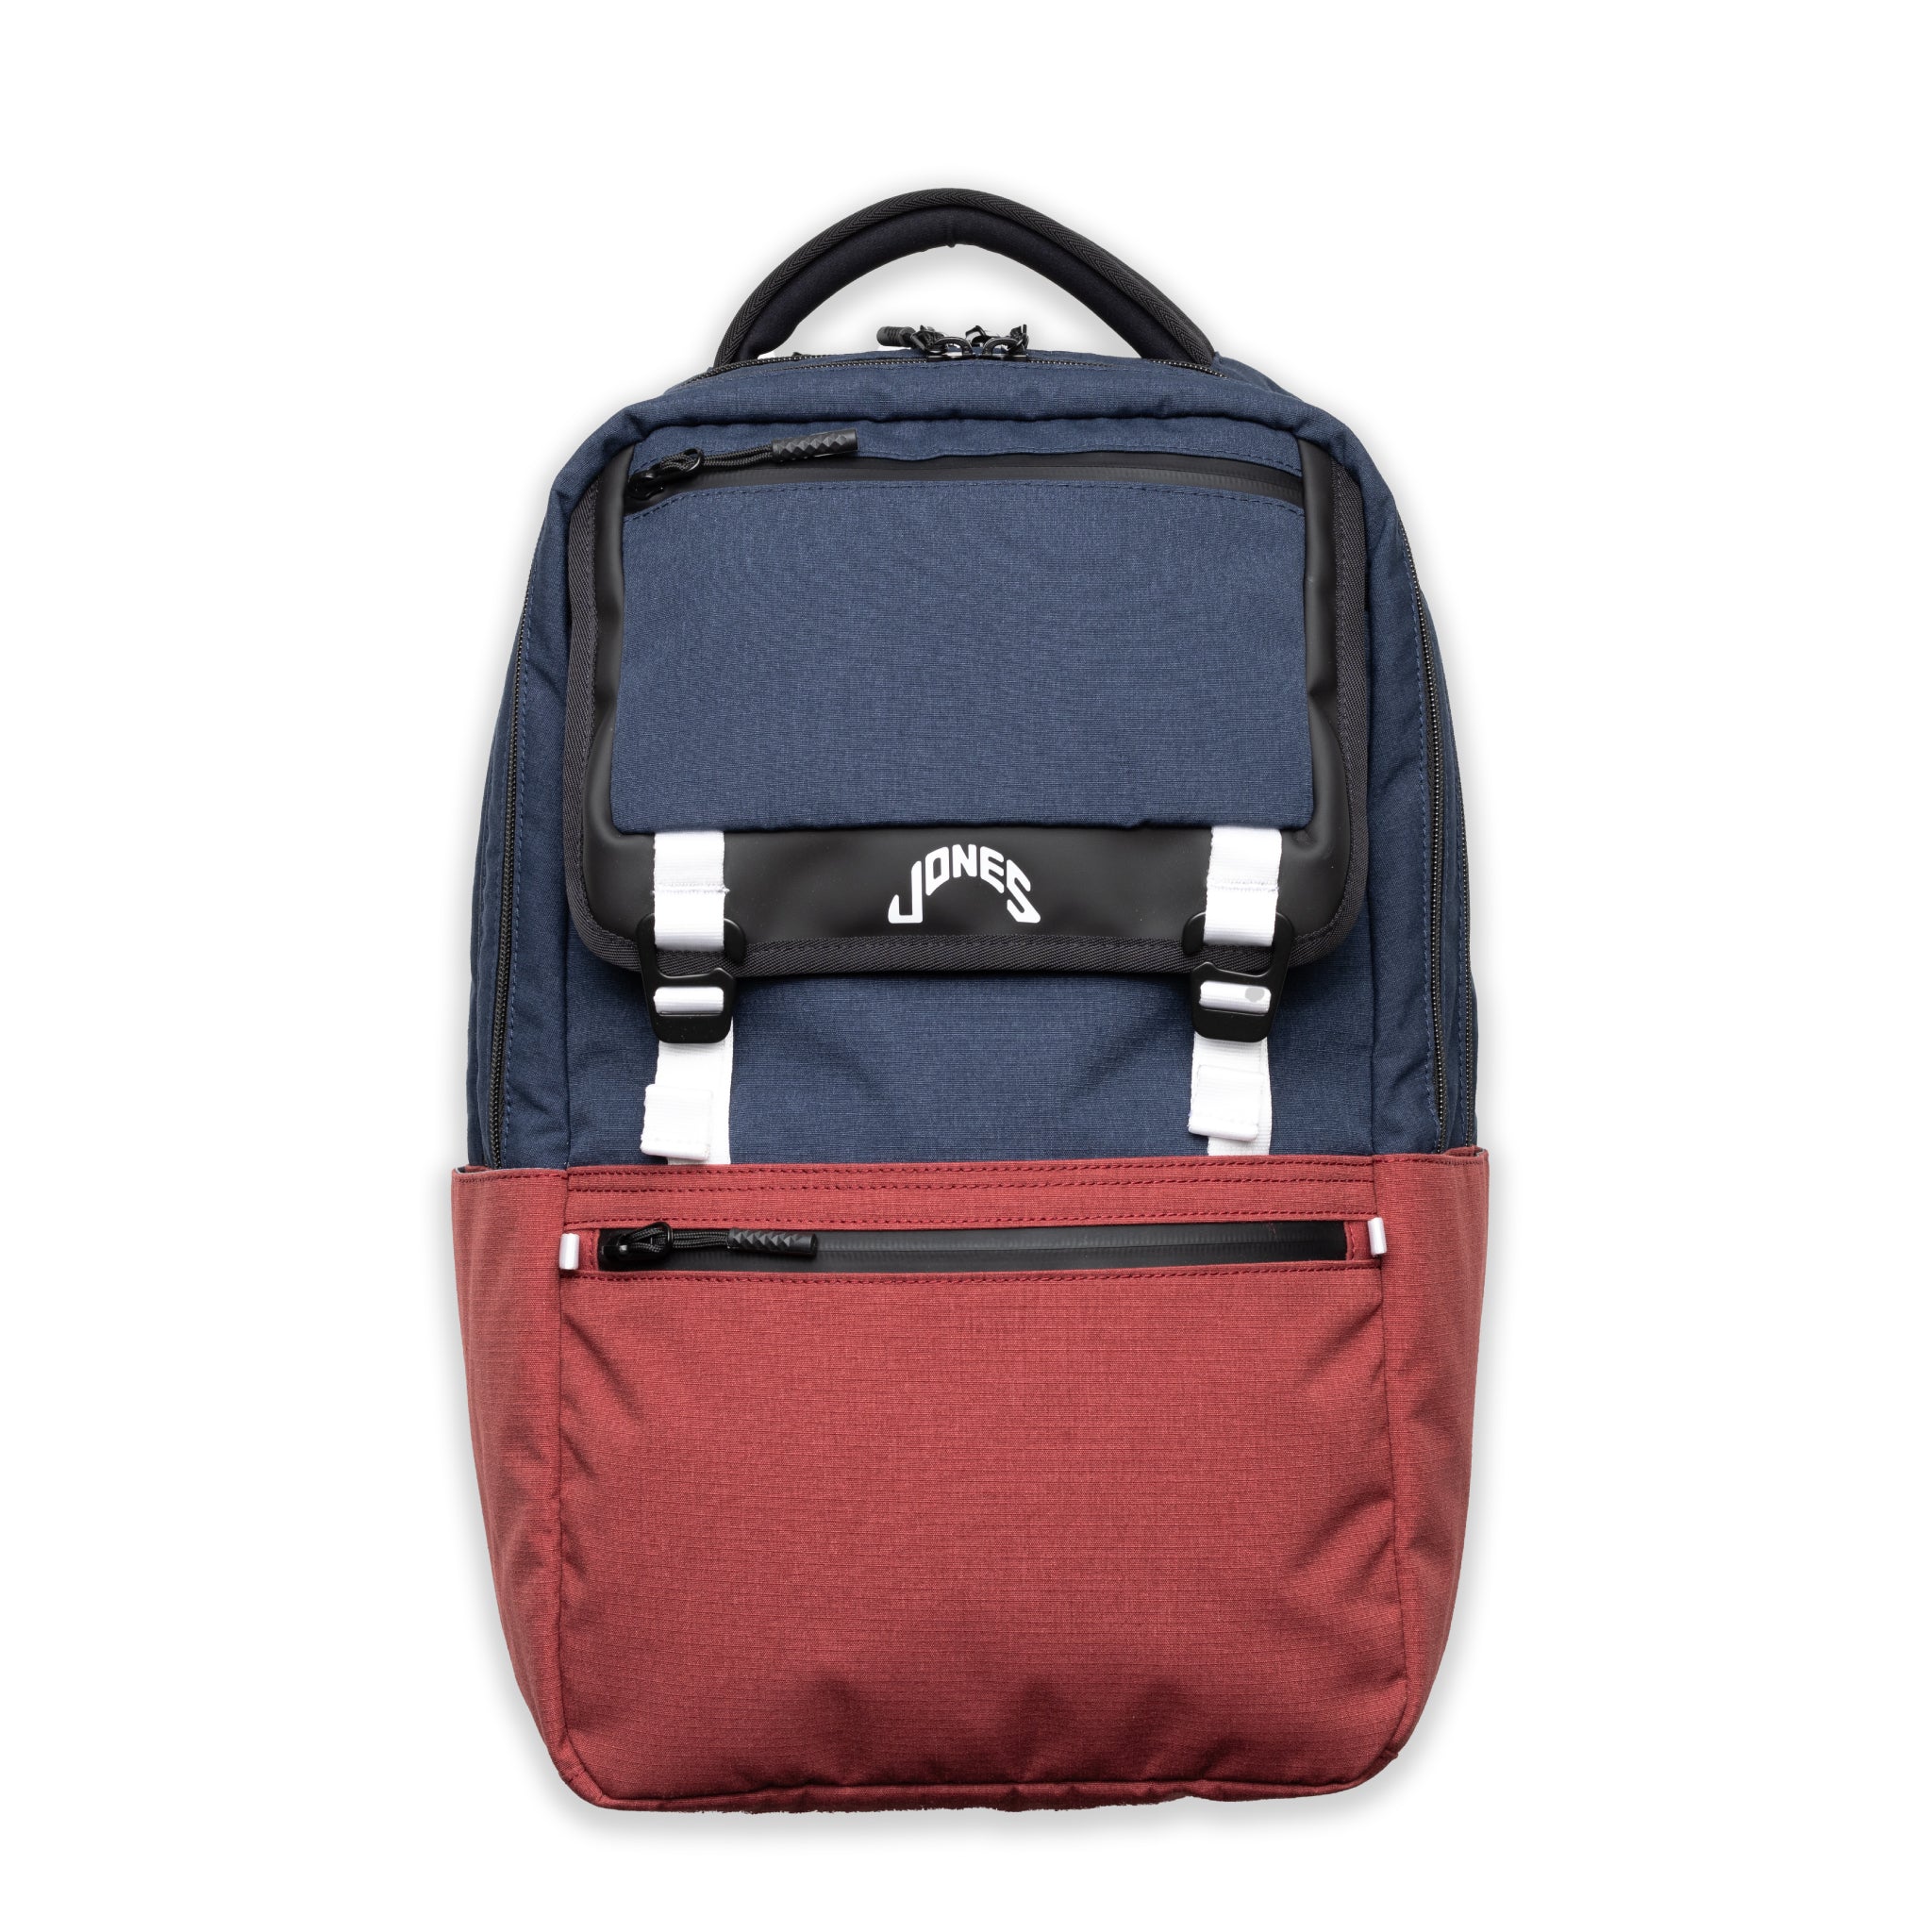 Jones Sports Co. A2 Backpack - Navy/Sonoma